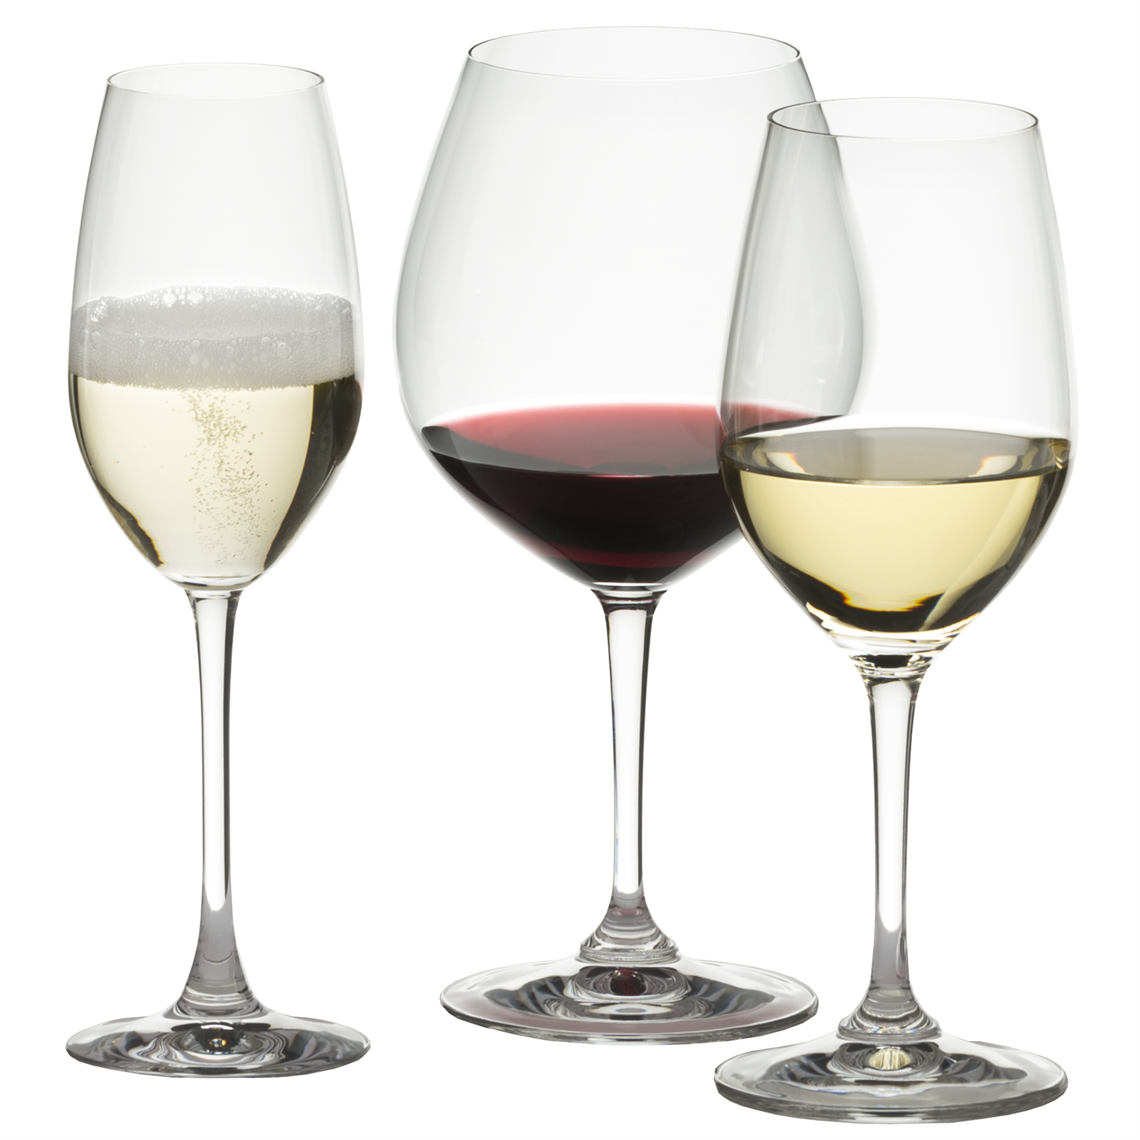 View more ivento from our Restaurant & Trade Glasses range